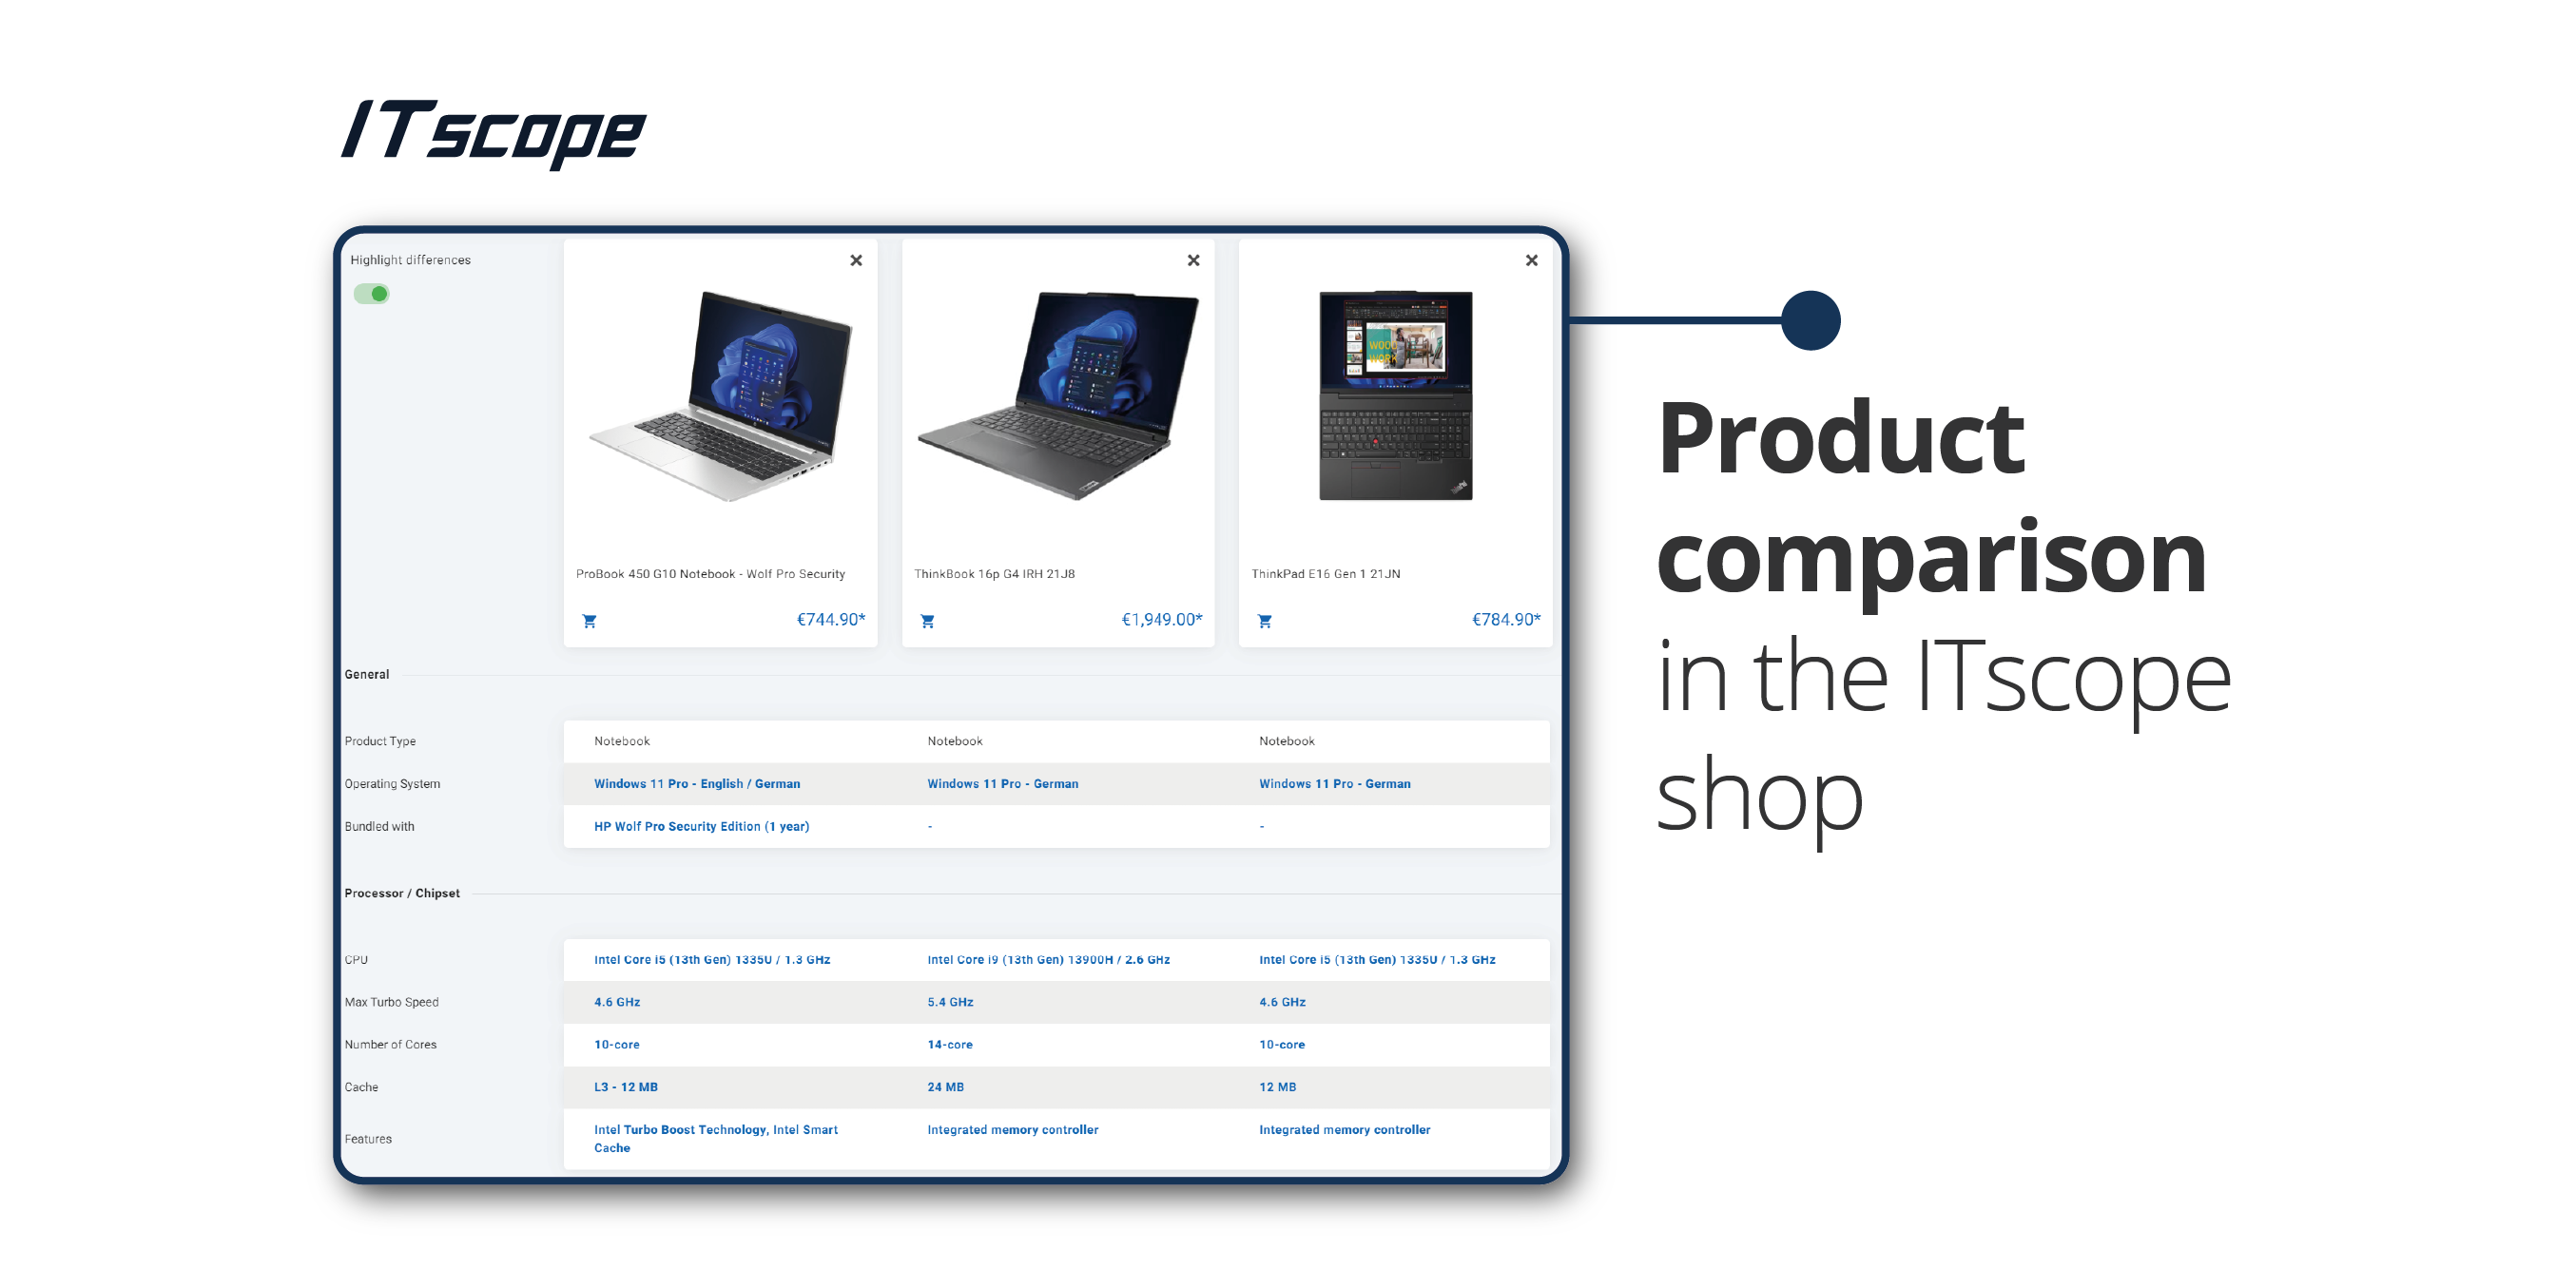 News from the B2B Suite: the new storefront is live